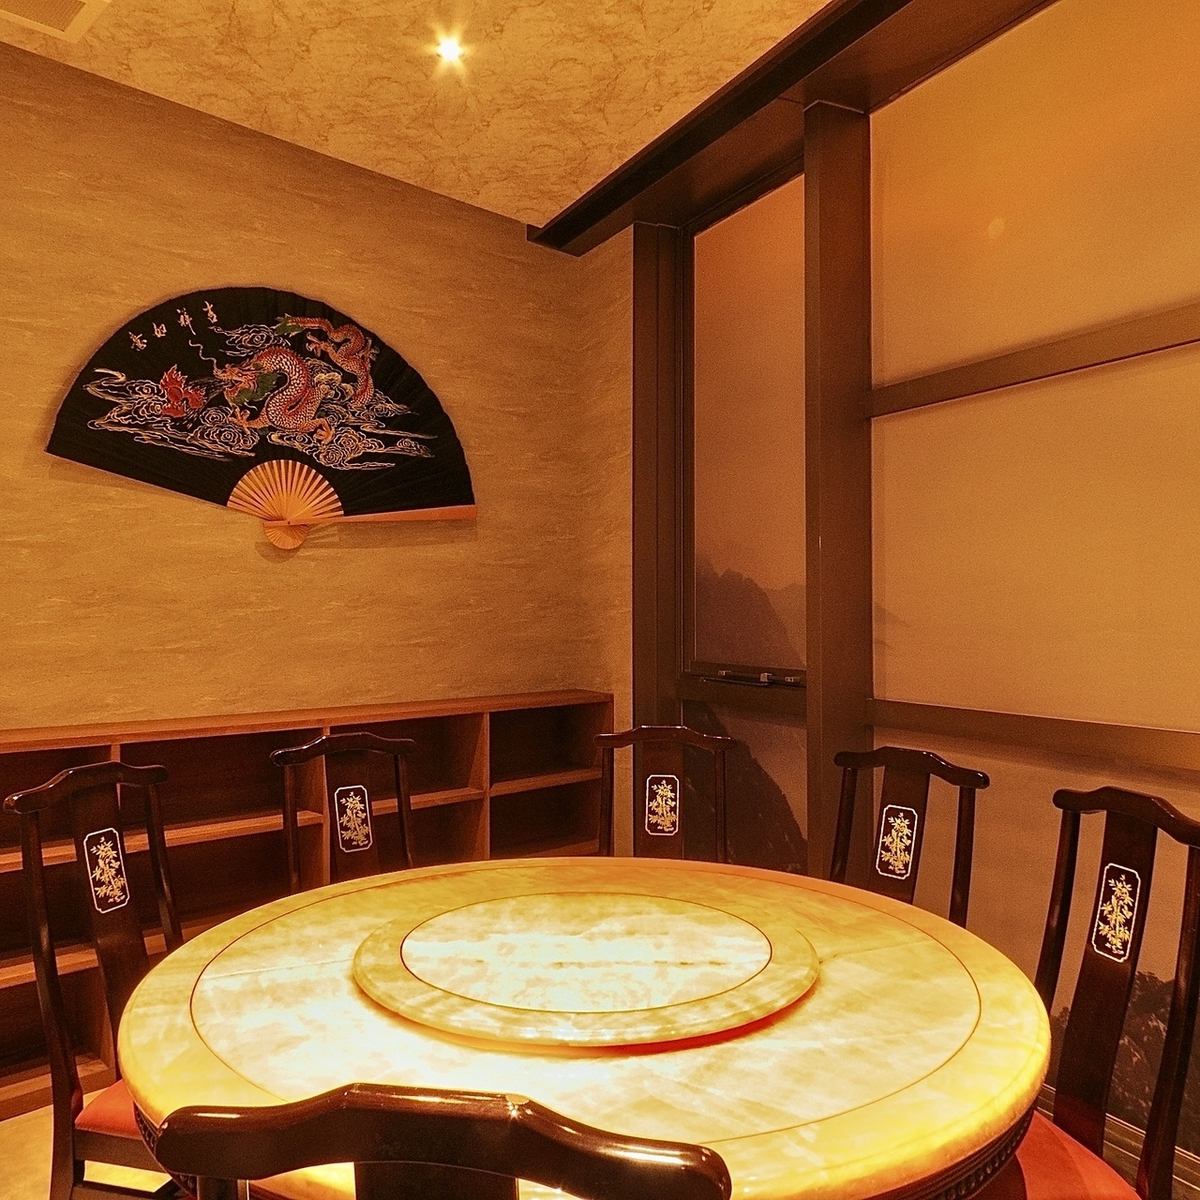 Recommended for small parties! You can enjoy a relaxing meal at a round table in a private room.